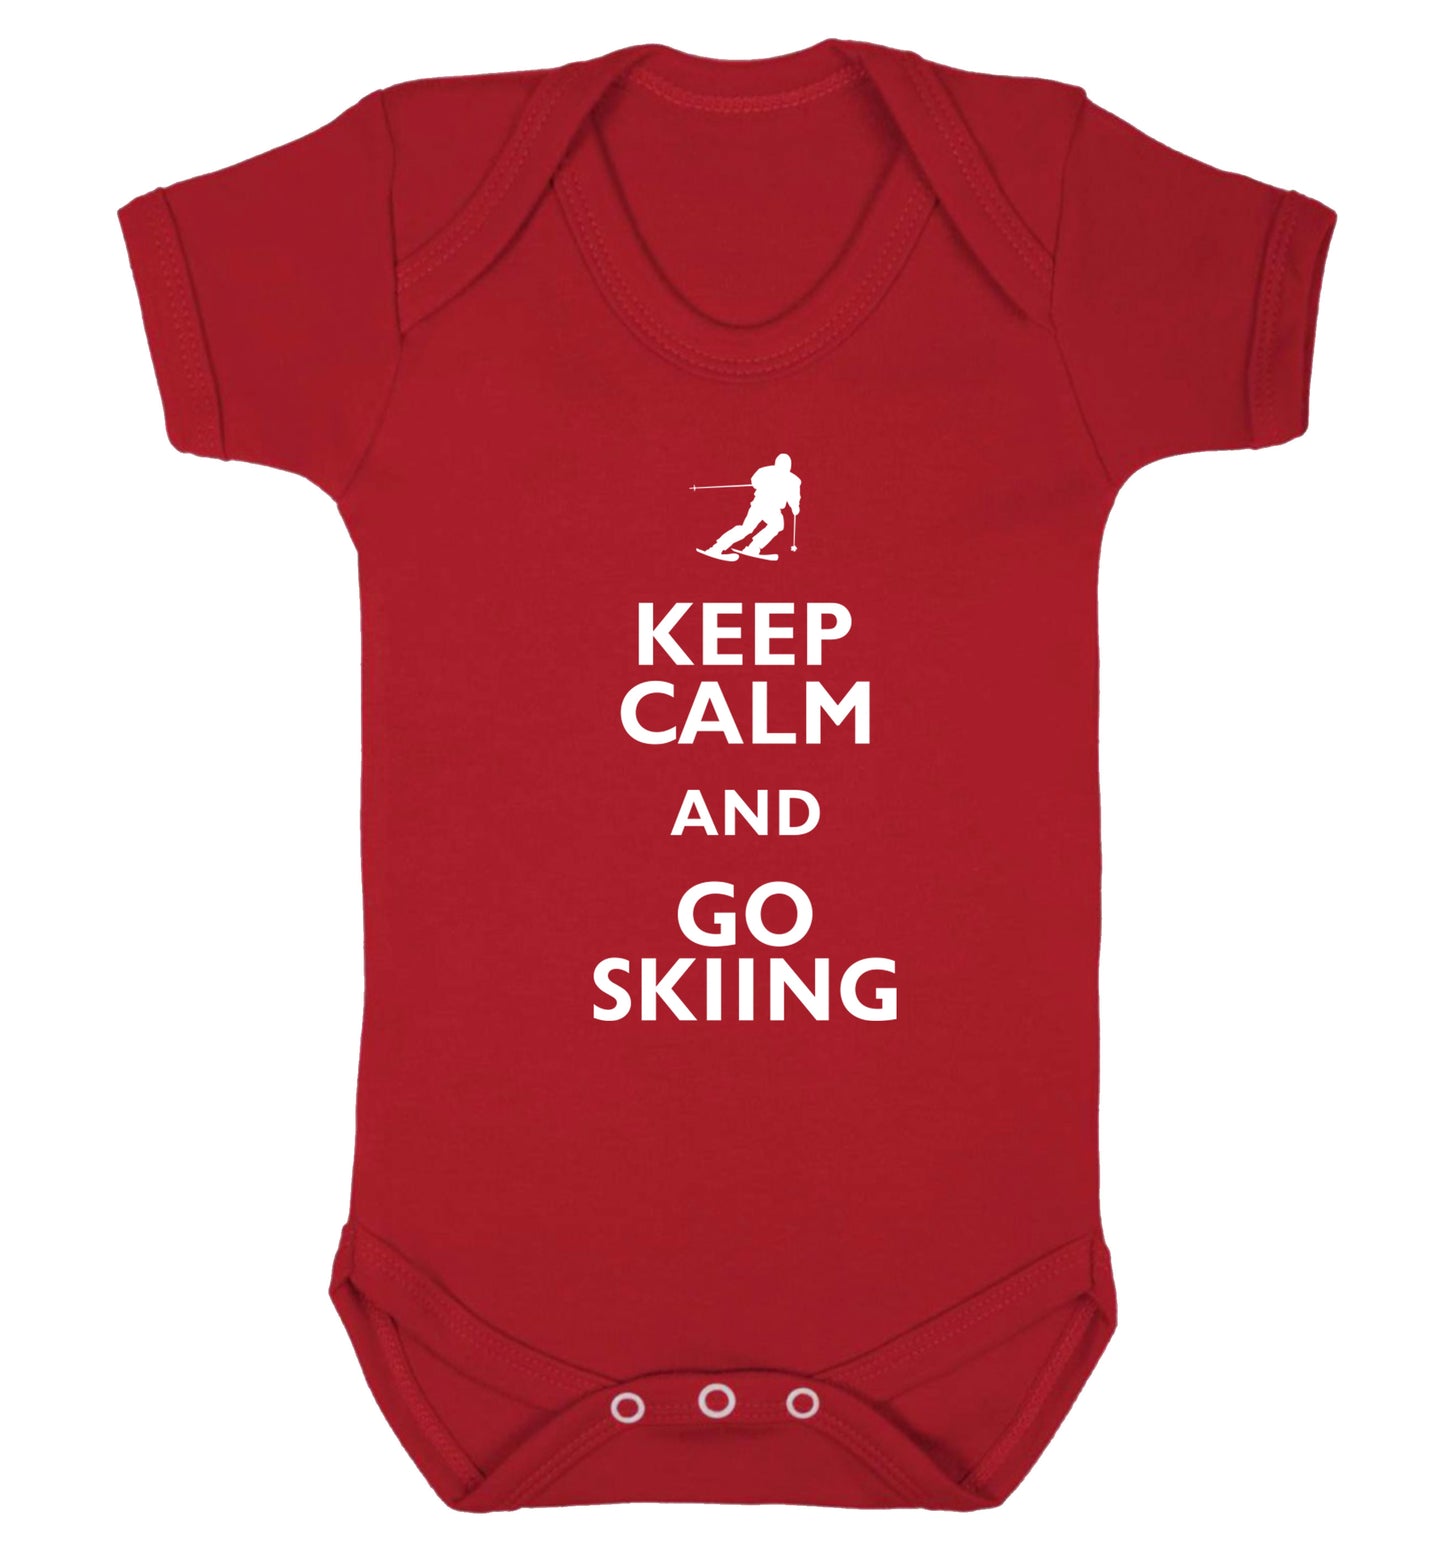 Keep calm and go skiing Baby Vest red 18-24 months